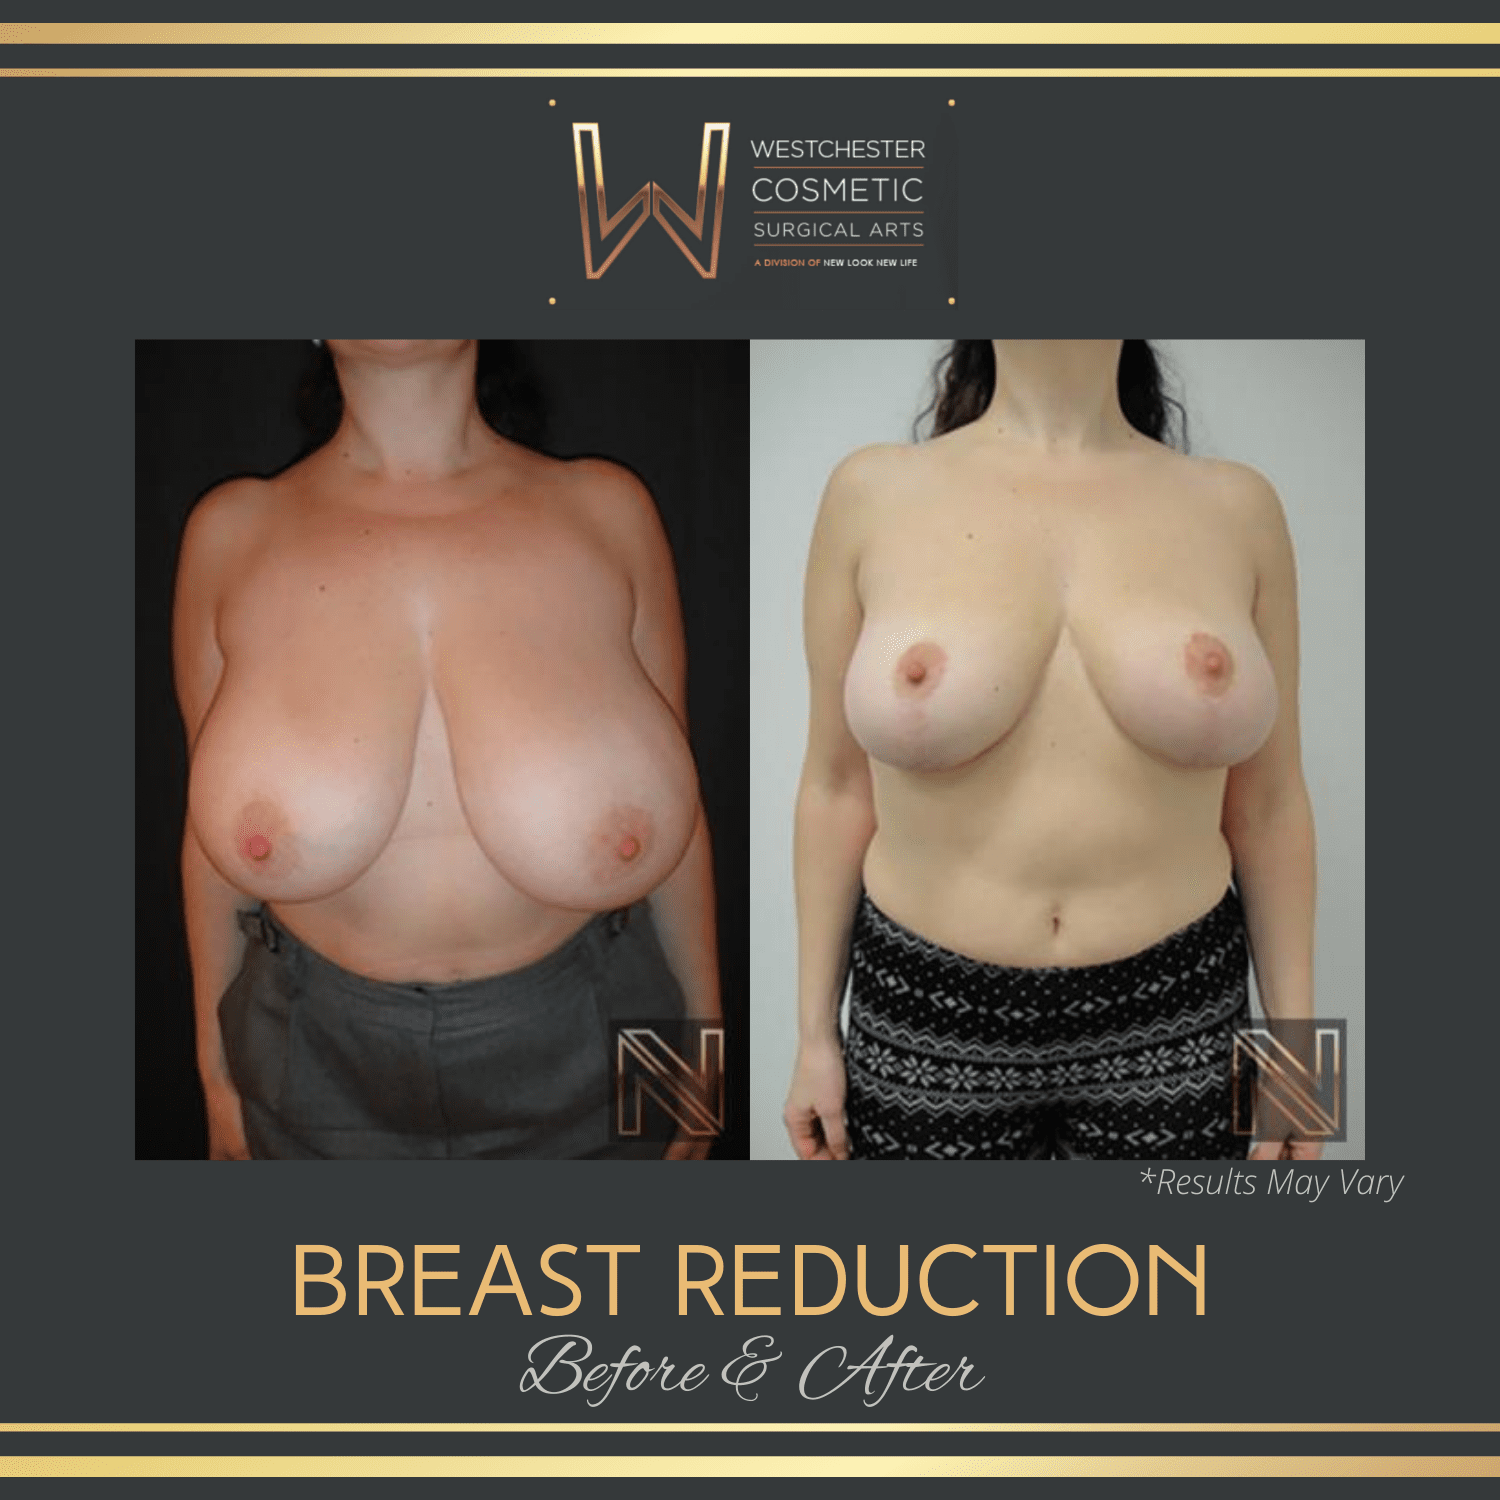 Before and after image showing the results of a breast reduction performed in Westchester, NY.